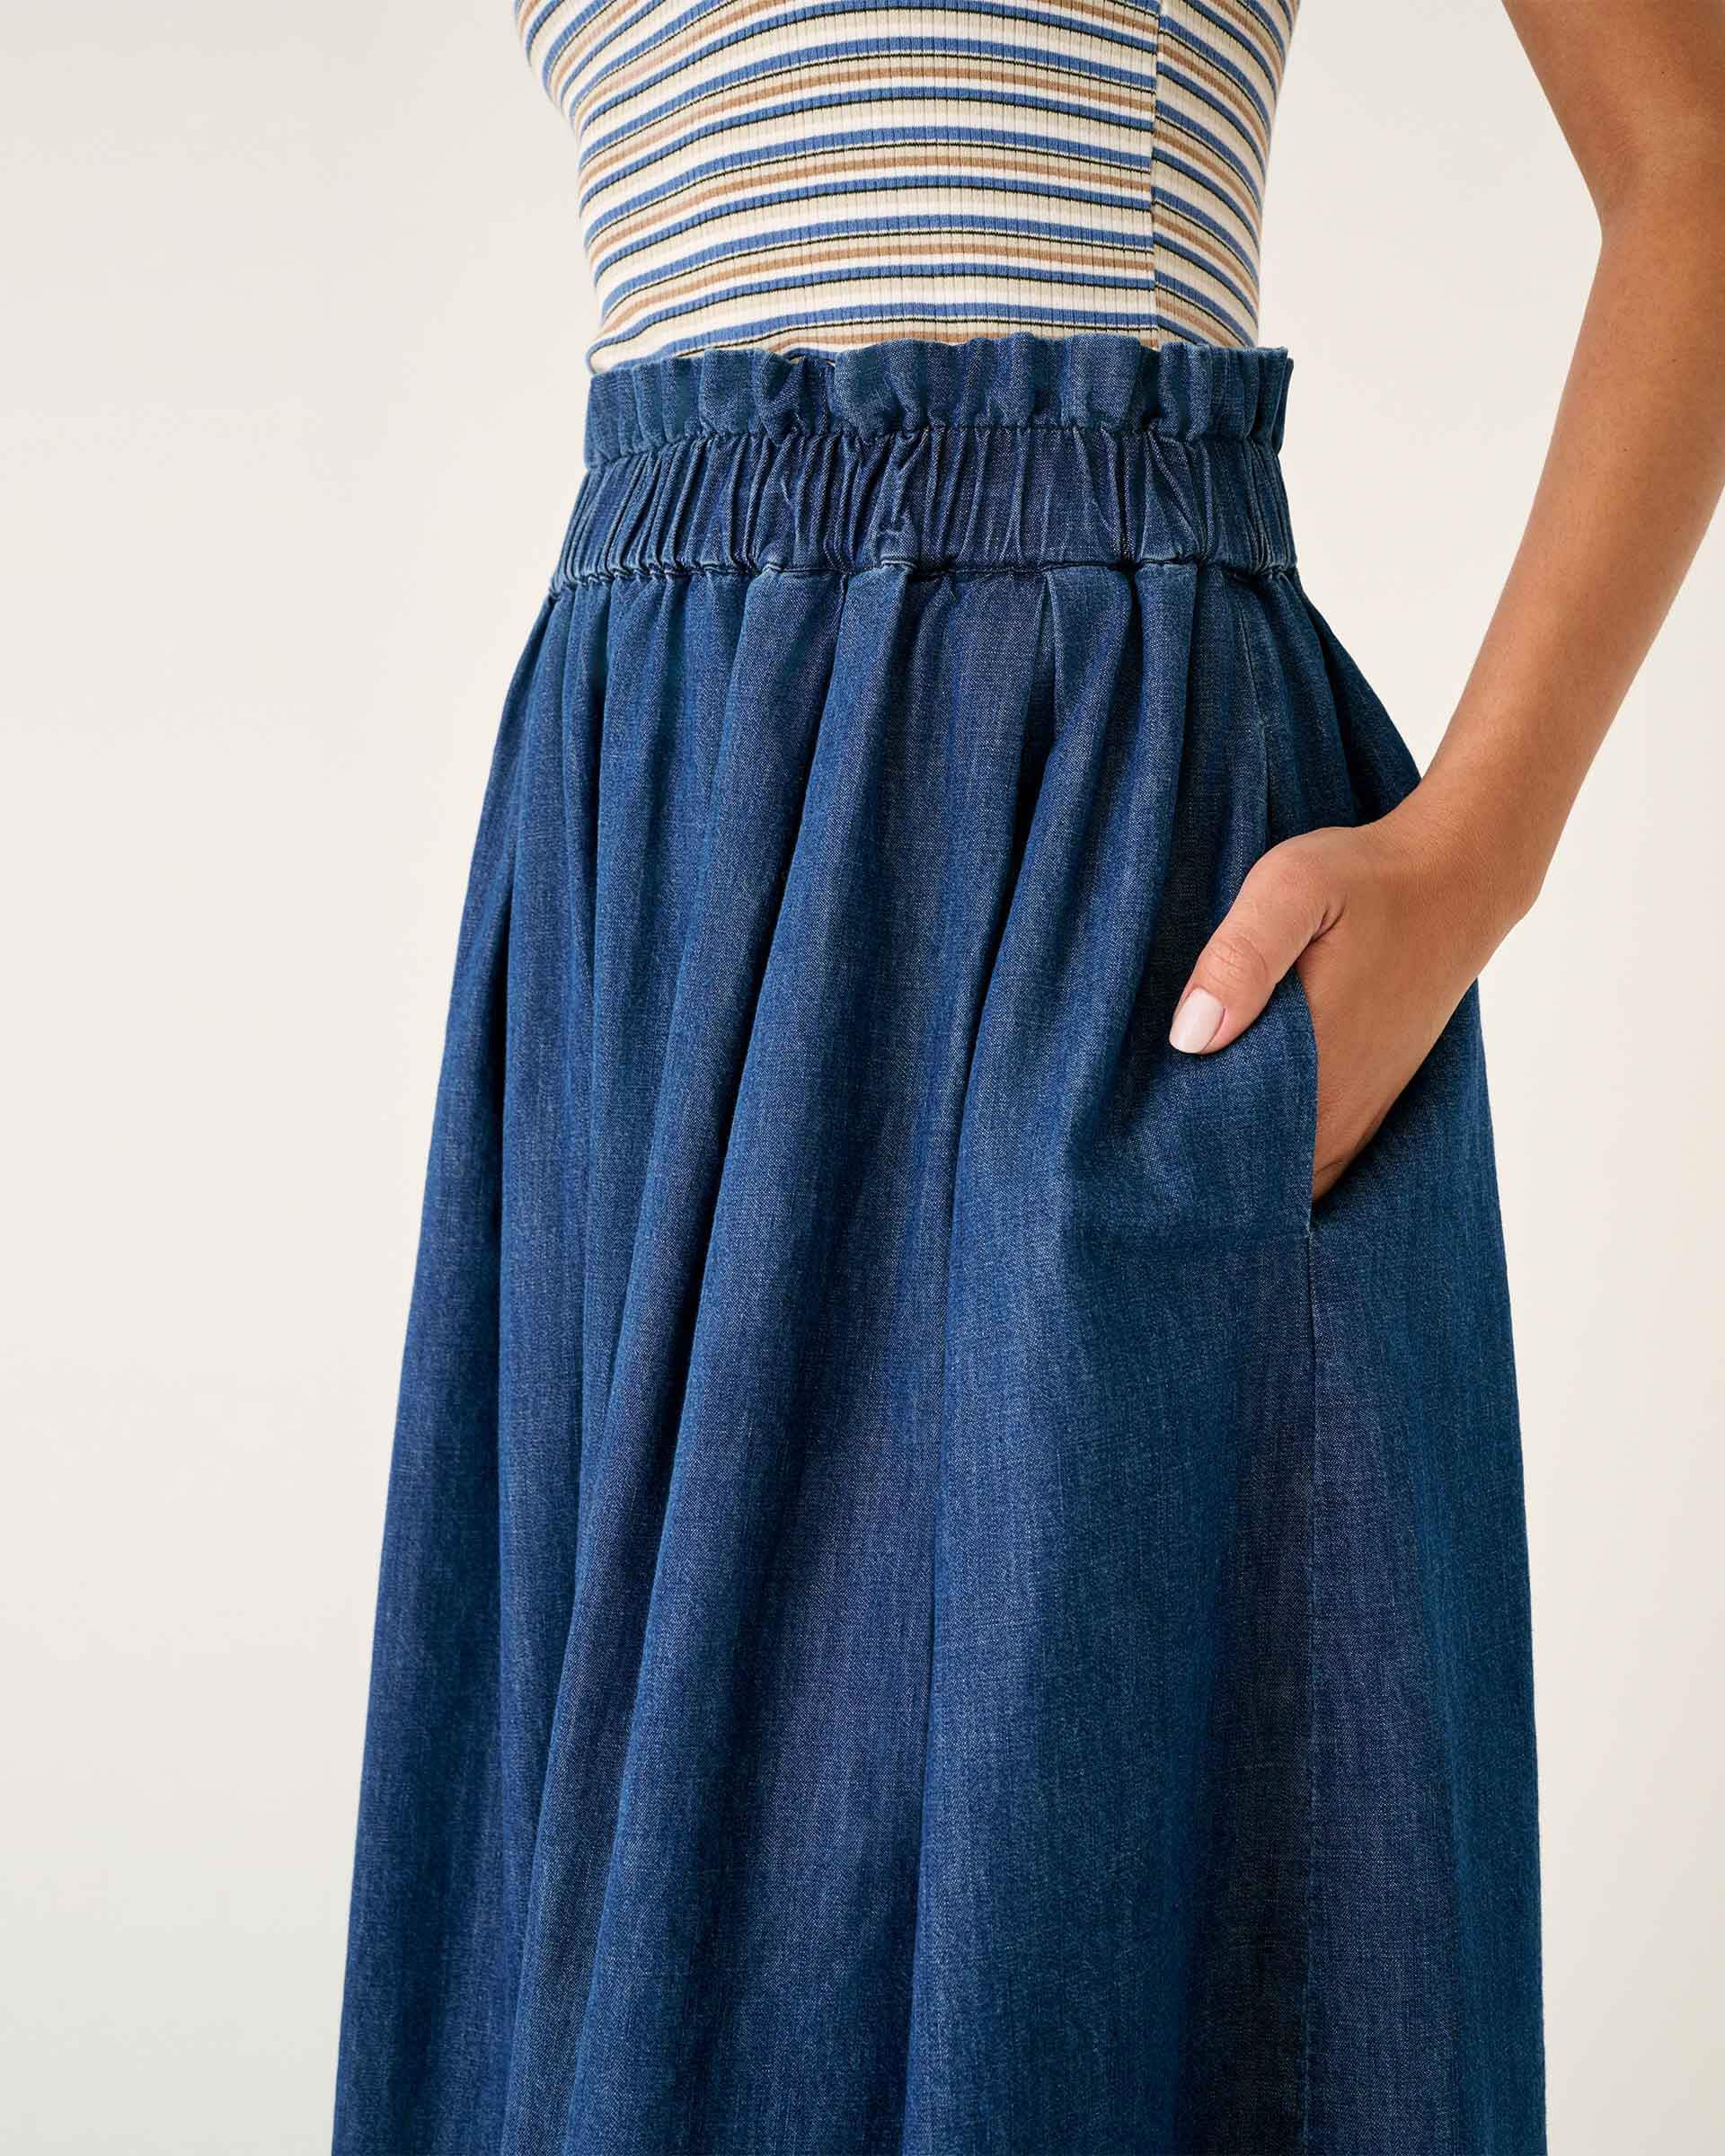 Women's Lakewashed Pull-On Skirt, Mid-Rise Chambray